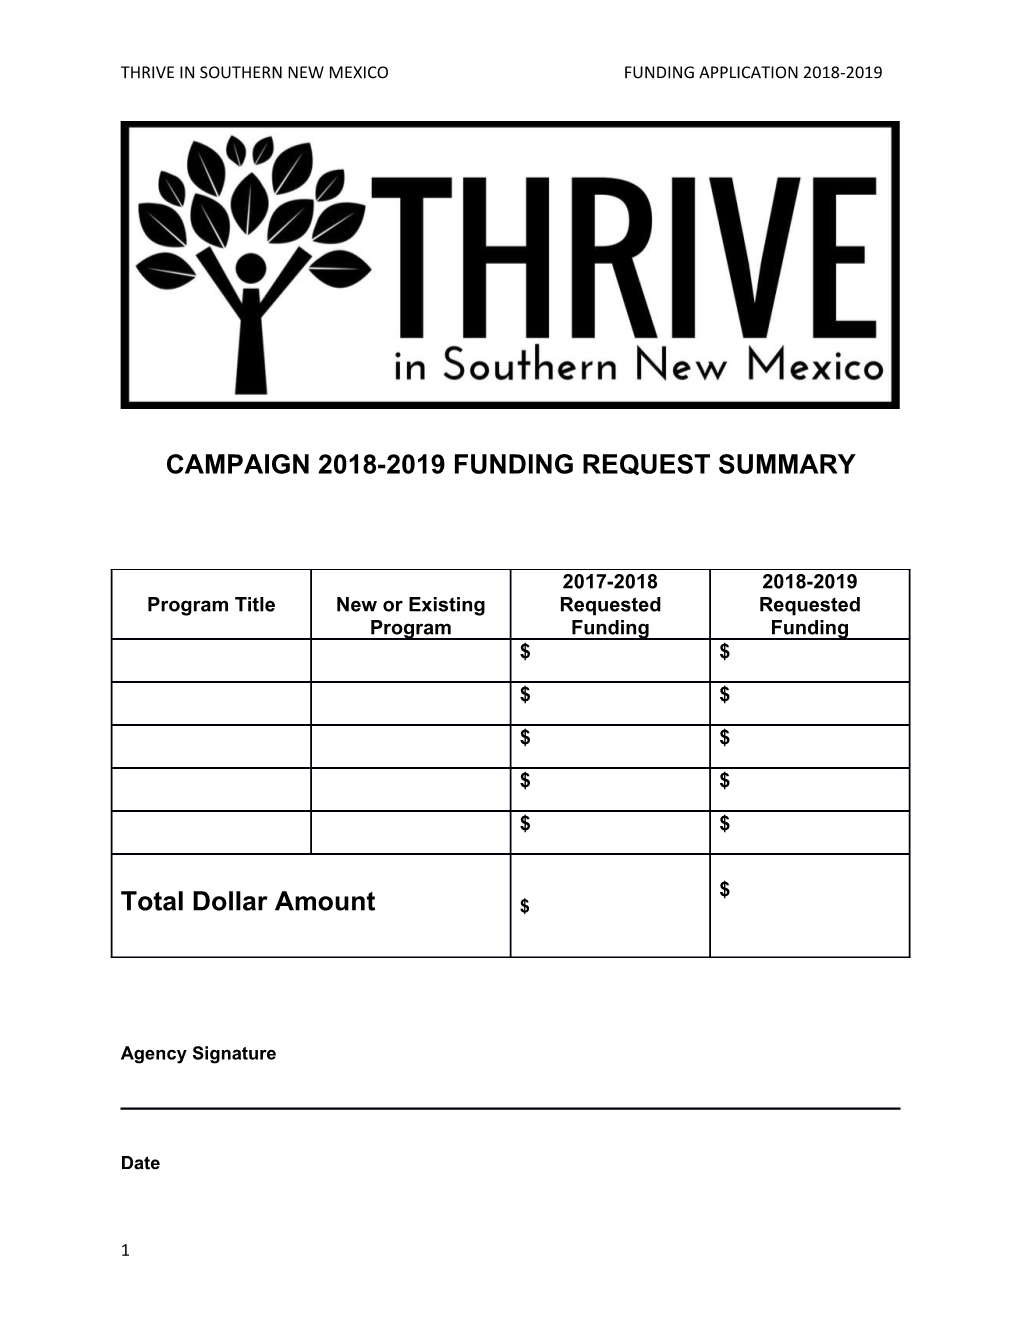 Thrive in Southern New Mexico Funding Application 2018-2019